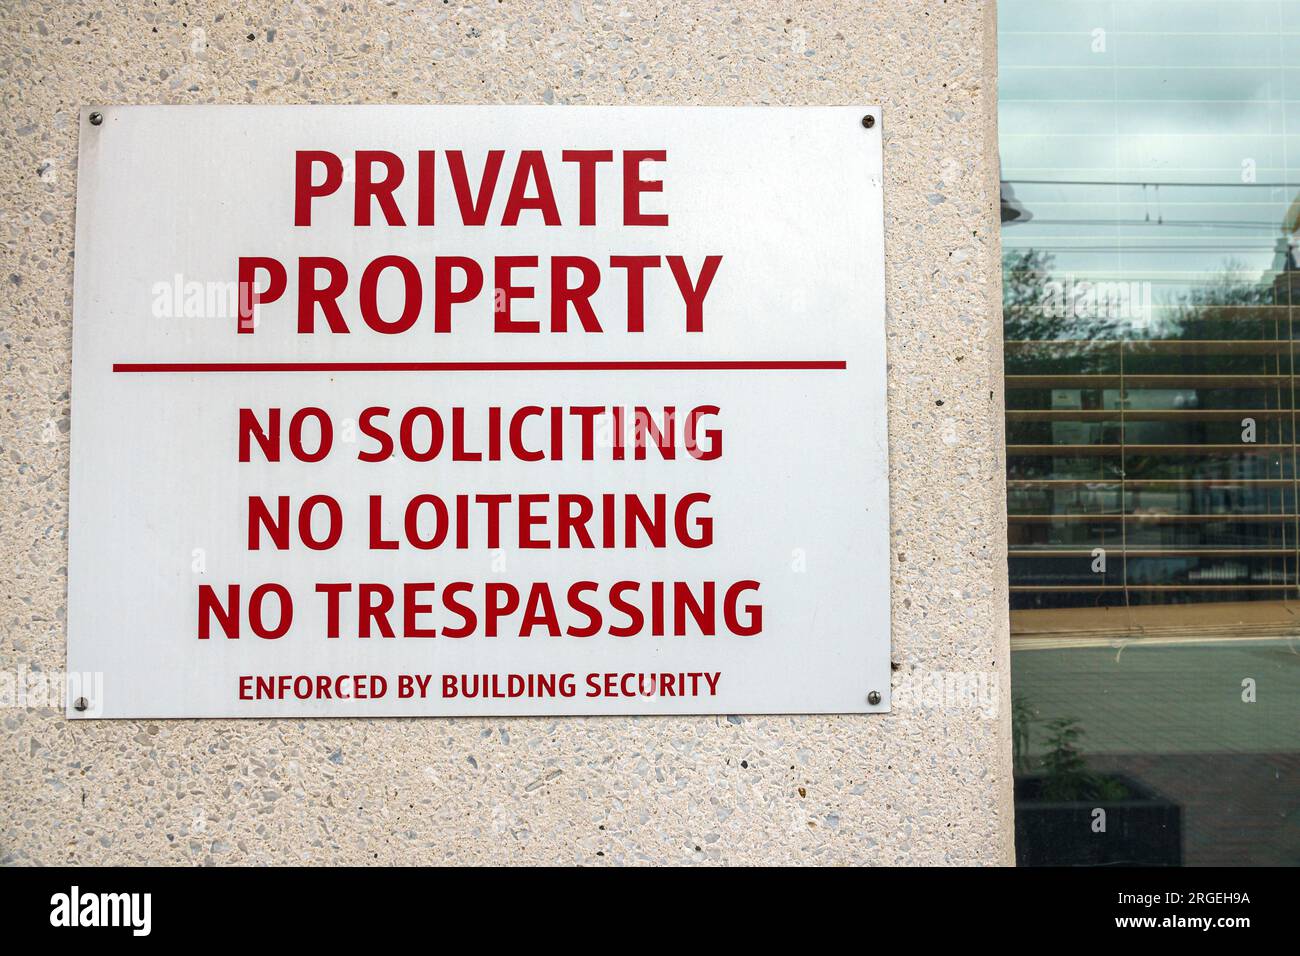 Charlotte North Carolina,generic private property no soliciting loitering trespassing sign,self-driving mobile robot offering free sample Stock Photo